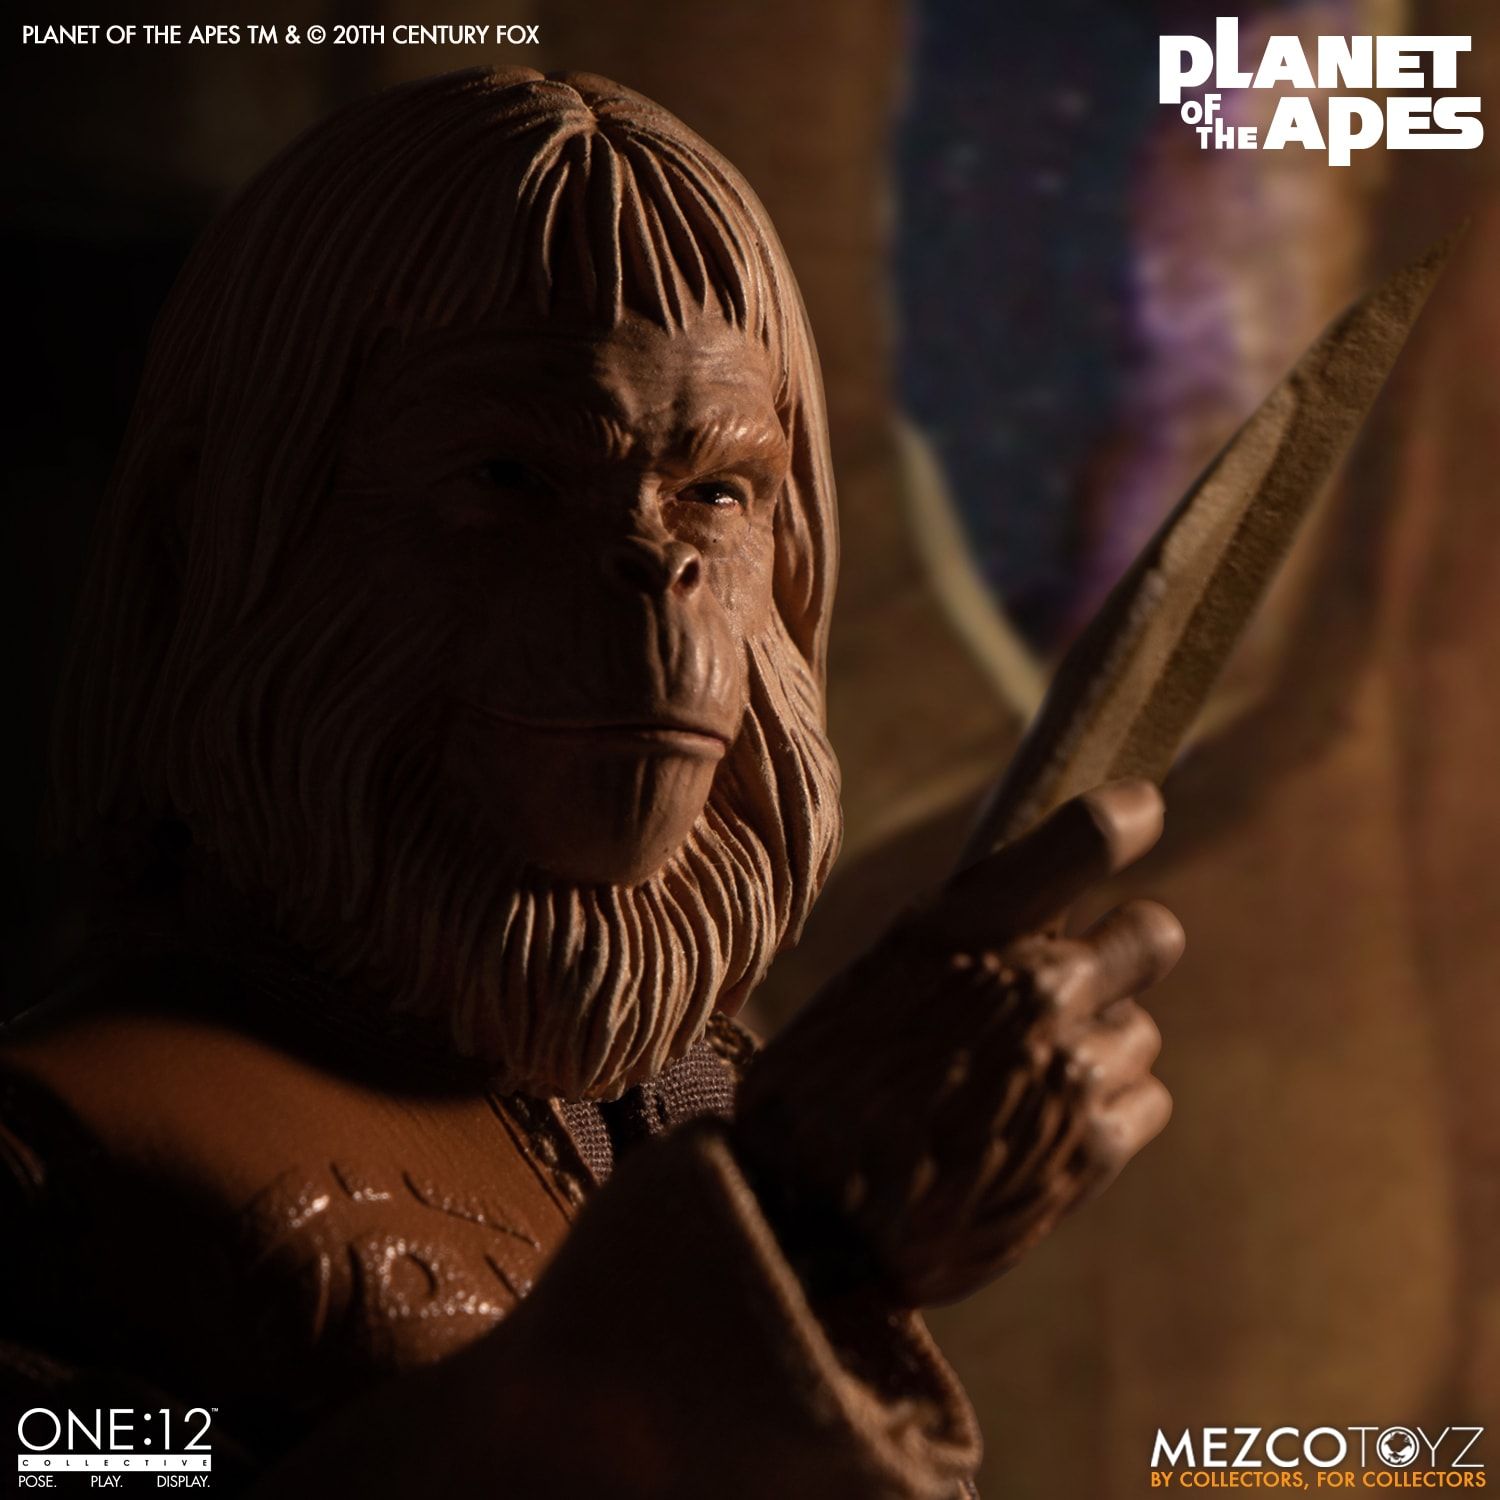 New Product: Mezco Planet of the Apes Dr. Zaius 8351